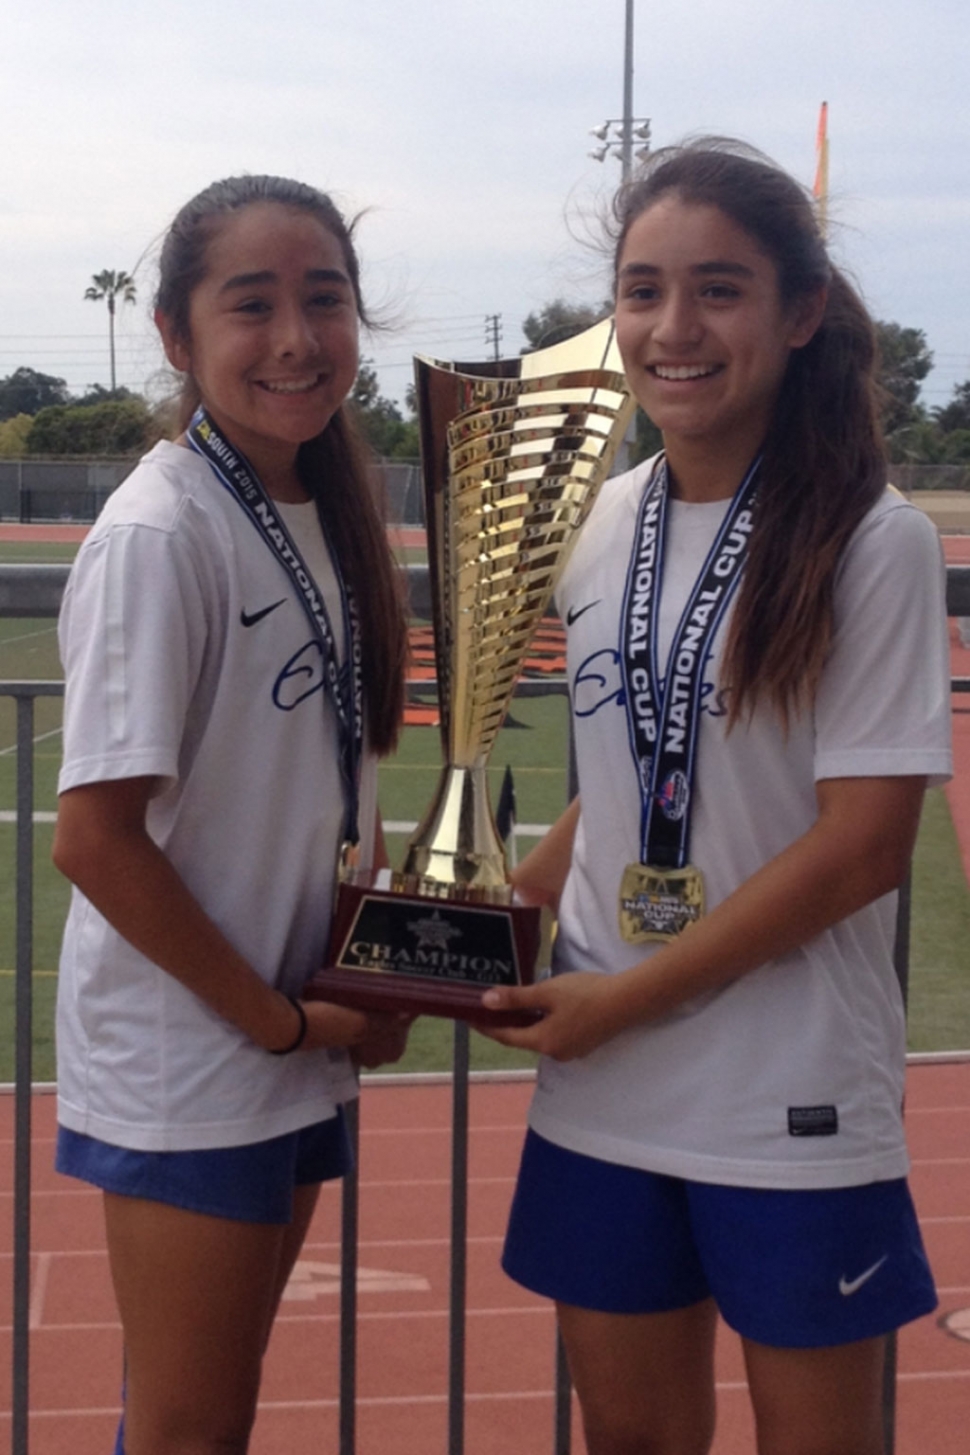 (l-r) Valerie Tobias and Jalynne Magana. Eagles girls U13 soccer club defeated Legends 2-1 Sunday 03/15/2015 in the championship game at Ventura College Sportsplex and captured the National Cup title and will be advancing to Far West Regional Championship games that will be held Boise Idaho late June 2015.  Club is composed players from Camarillo, Ventura, Oxnard, Newbury park, Pasadena and these to ladies from Fillmore.